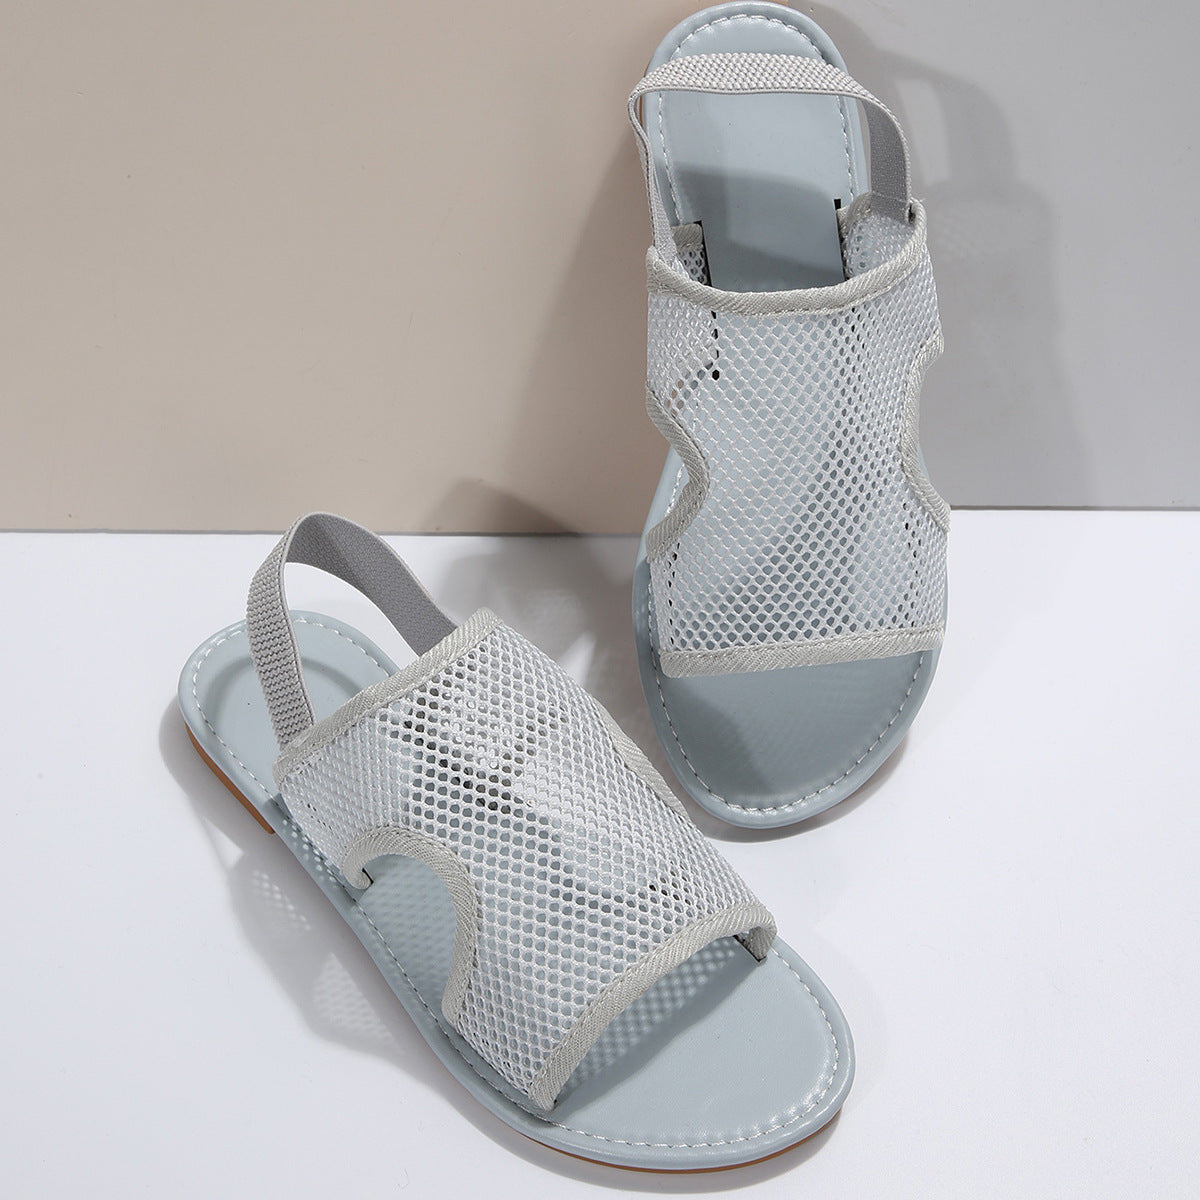 New Mesh Sandals Summer Casual Breathable Flat Shoes For Women Men Beach Shoes